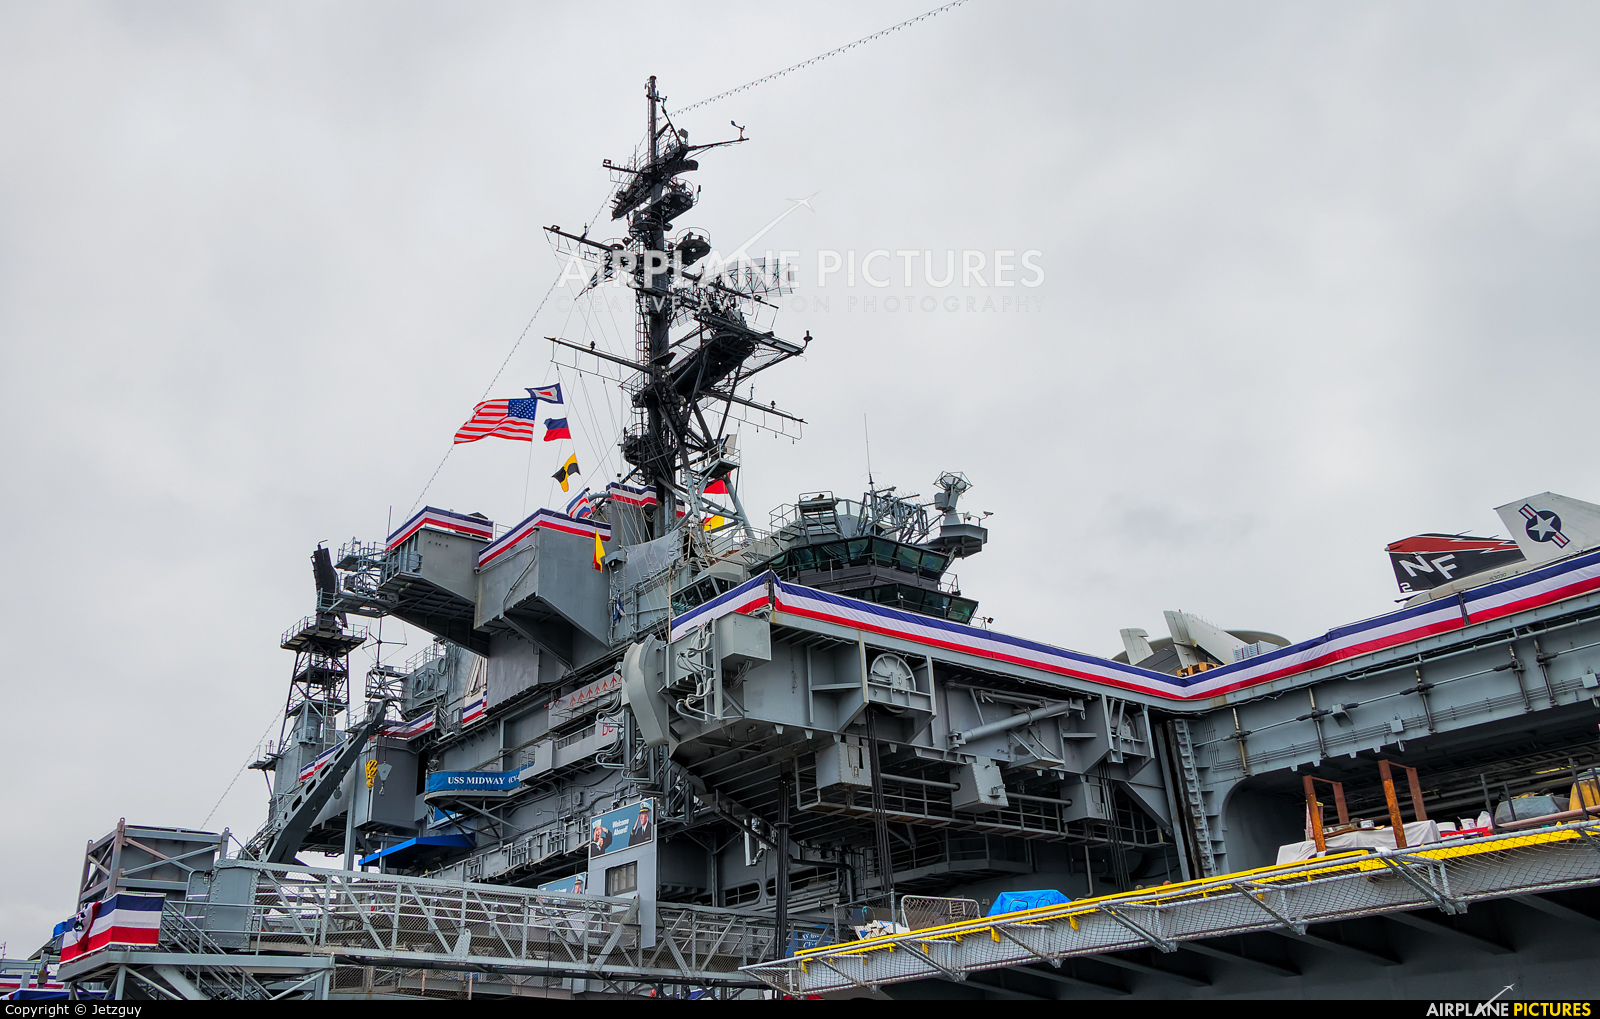 USA - Navy - aircraft at San Diego - USS Midway Museum